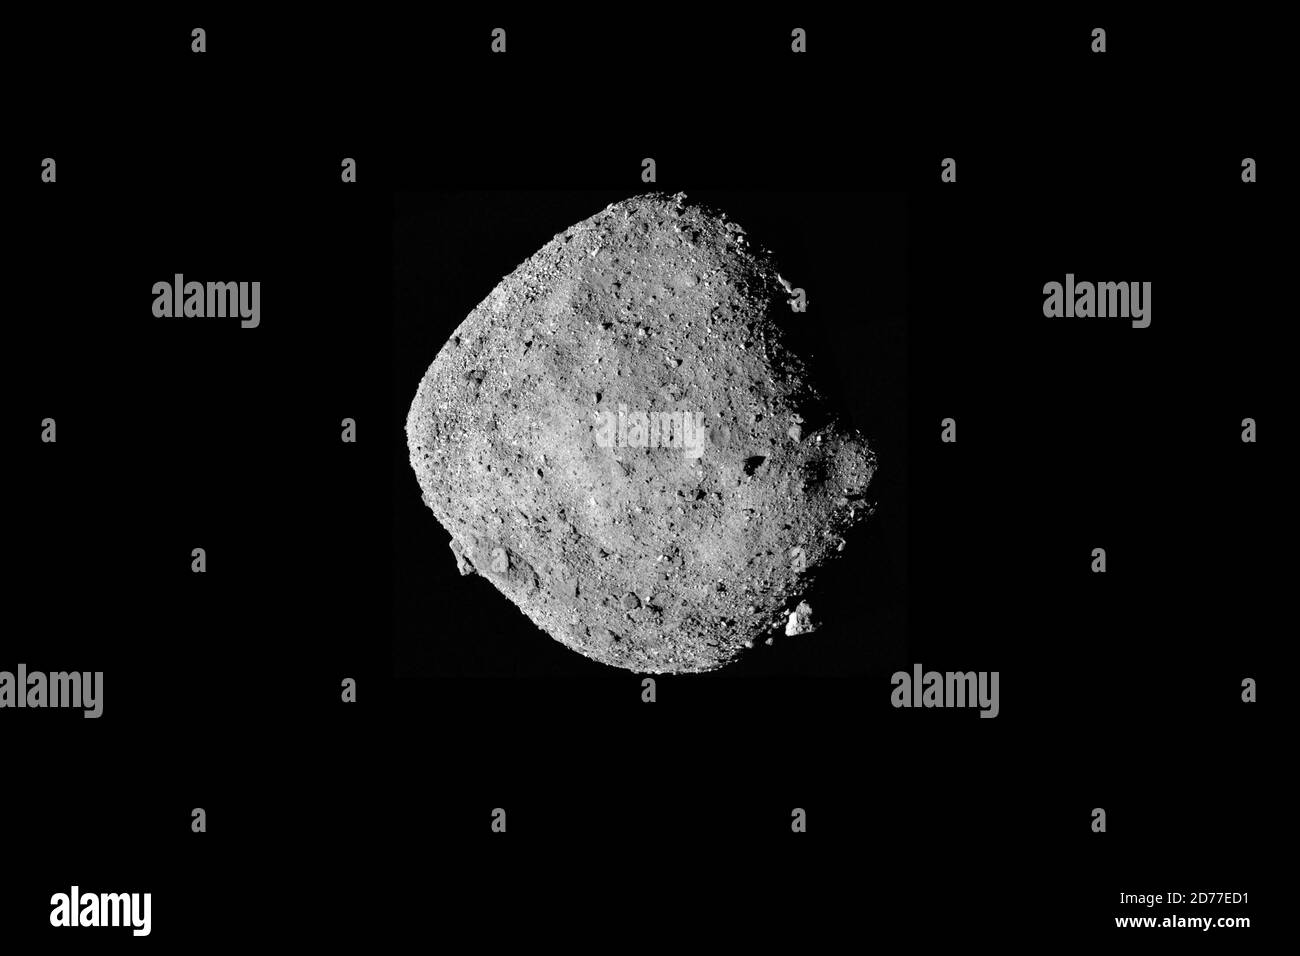 ASTEROID BENNU - 02 December 2018 - A mosaic image of asteroid Bennu is available, composed of 12 PolyCam images collected on Dec. 2 by the OSIRIS-REx Stock Photo